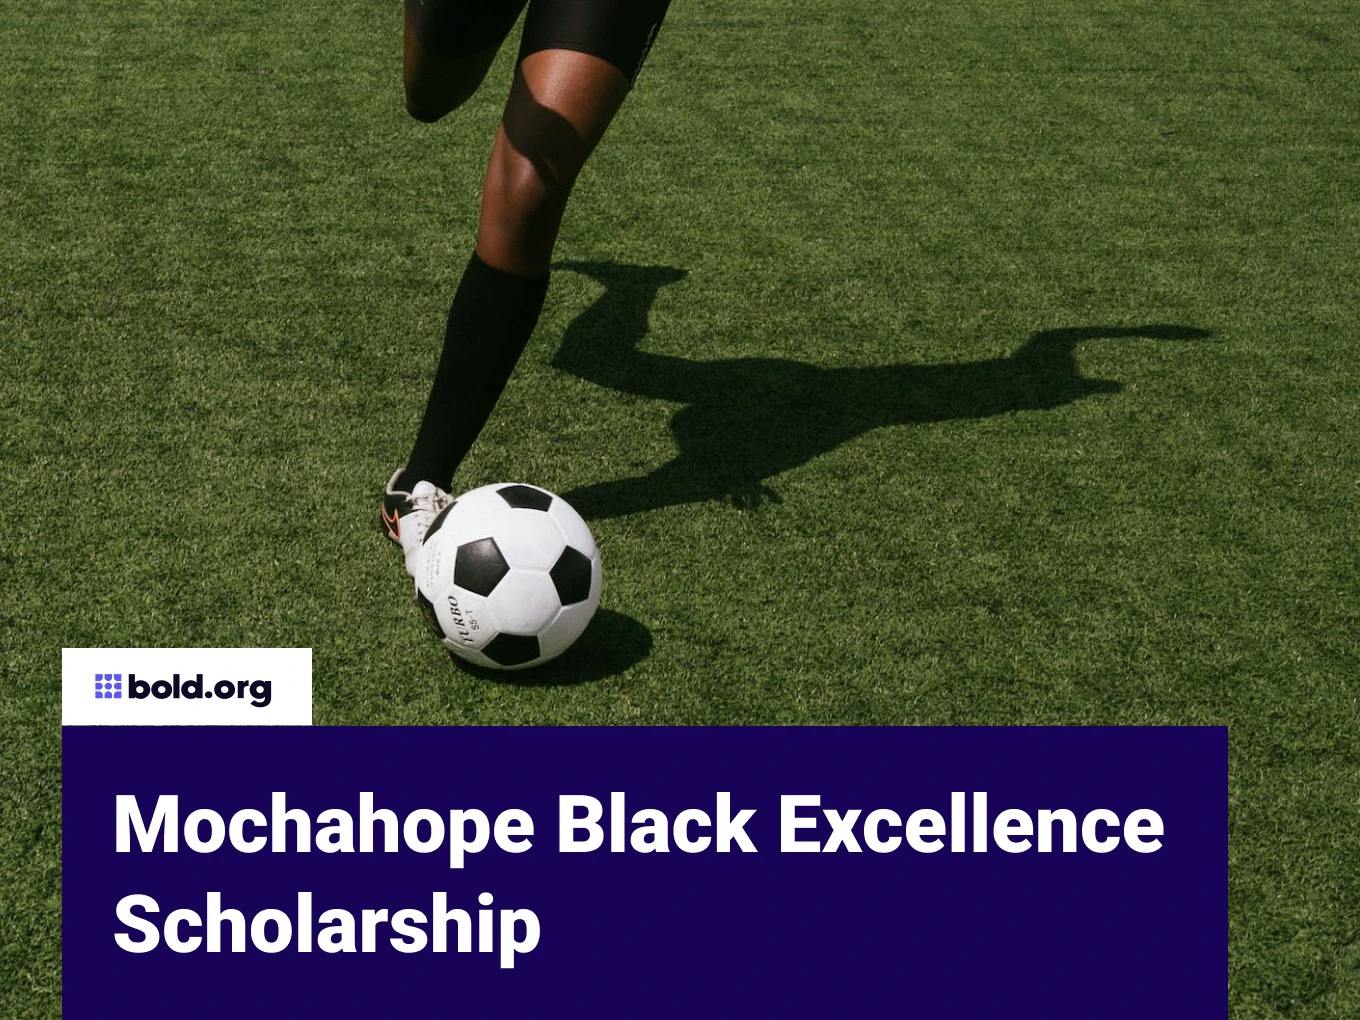 Mochahope Black Excellence Scholarship